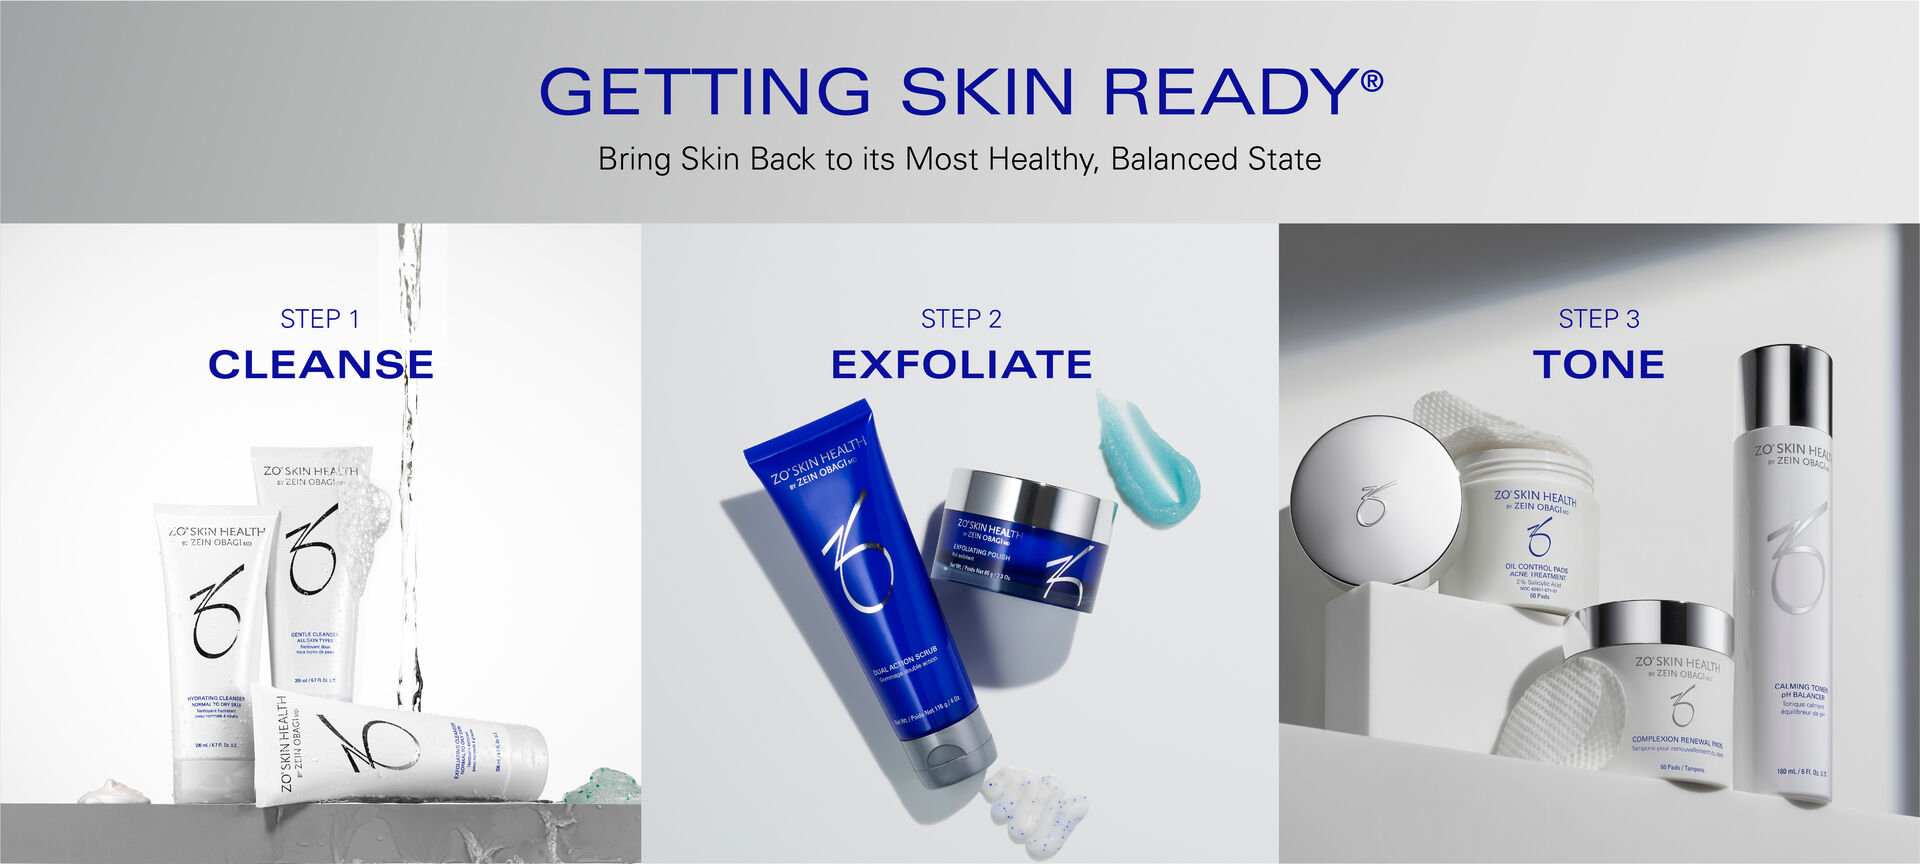 Getting Skin Ready® Infographic